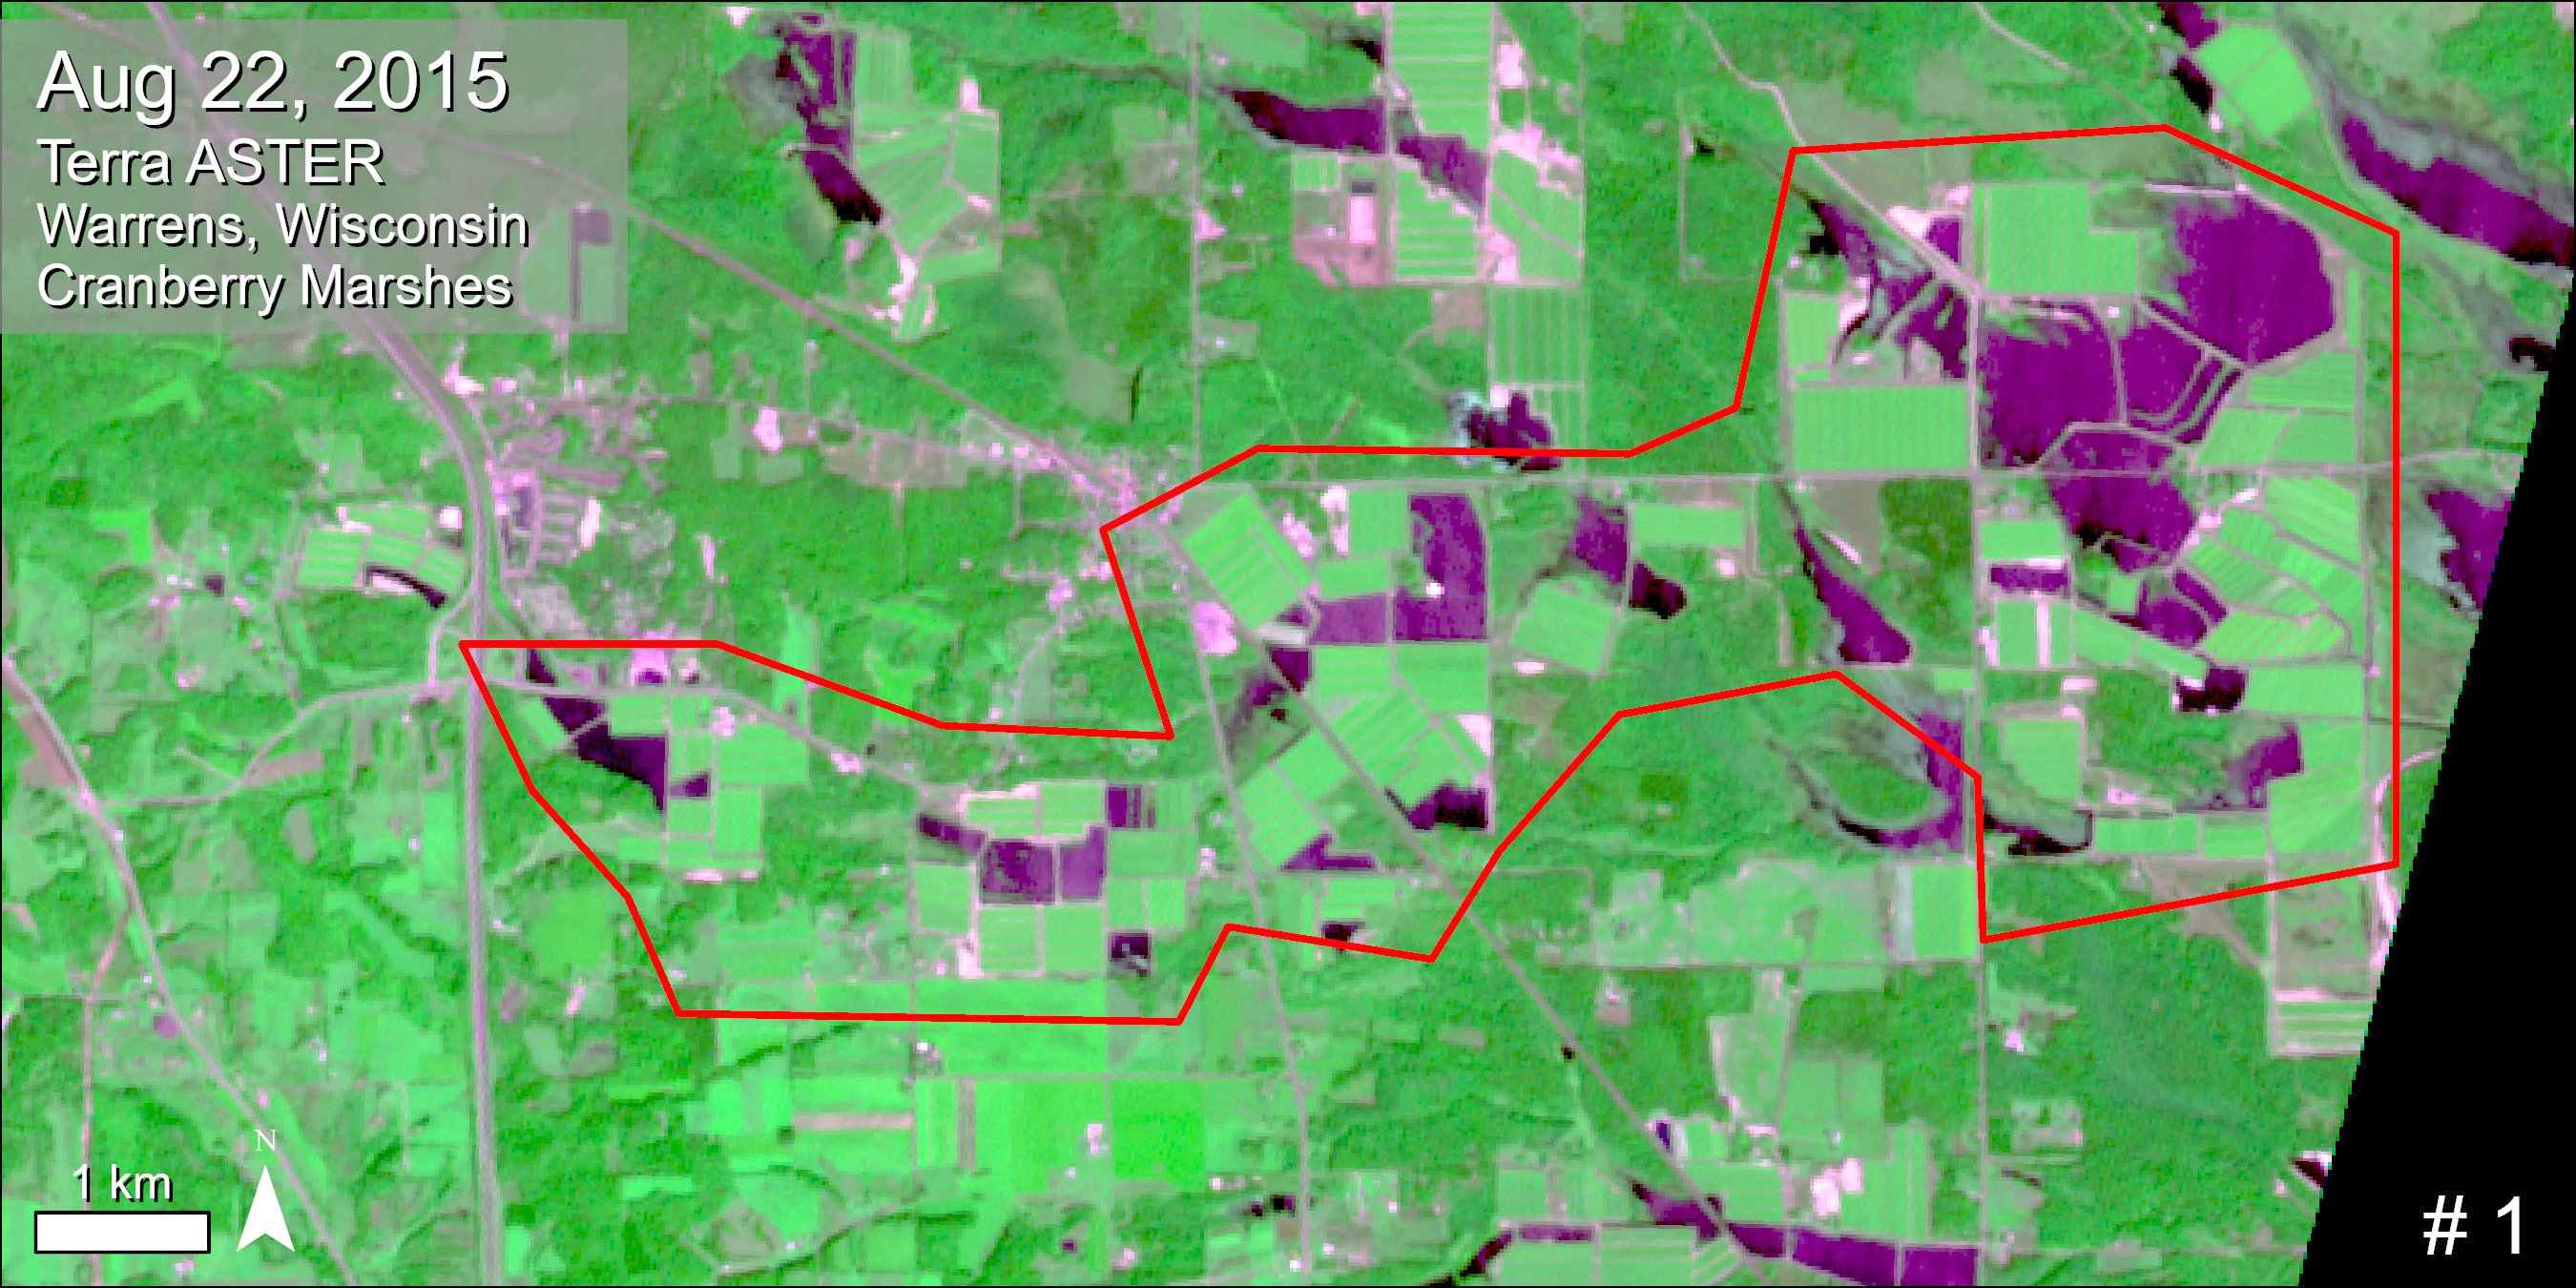 Terra ASTER imagery over cranberry marshes in Wisconsin.